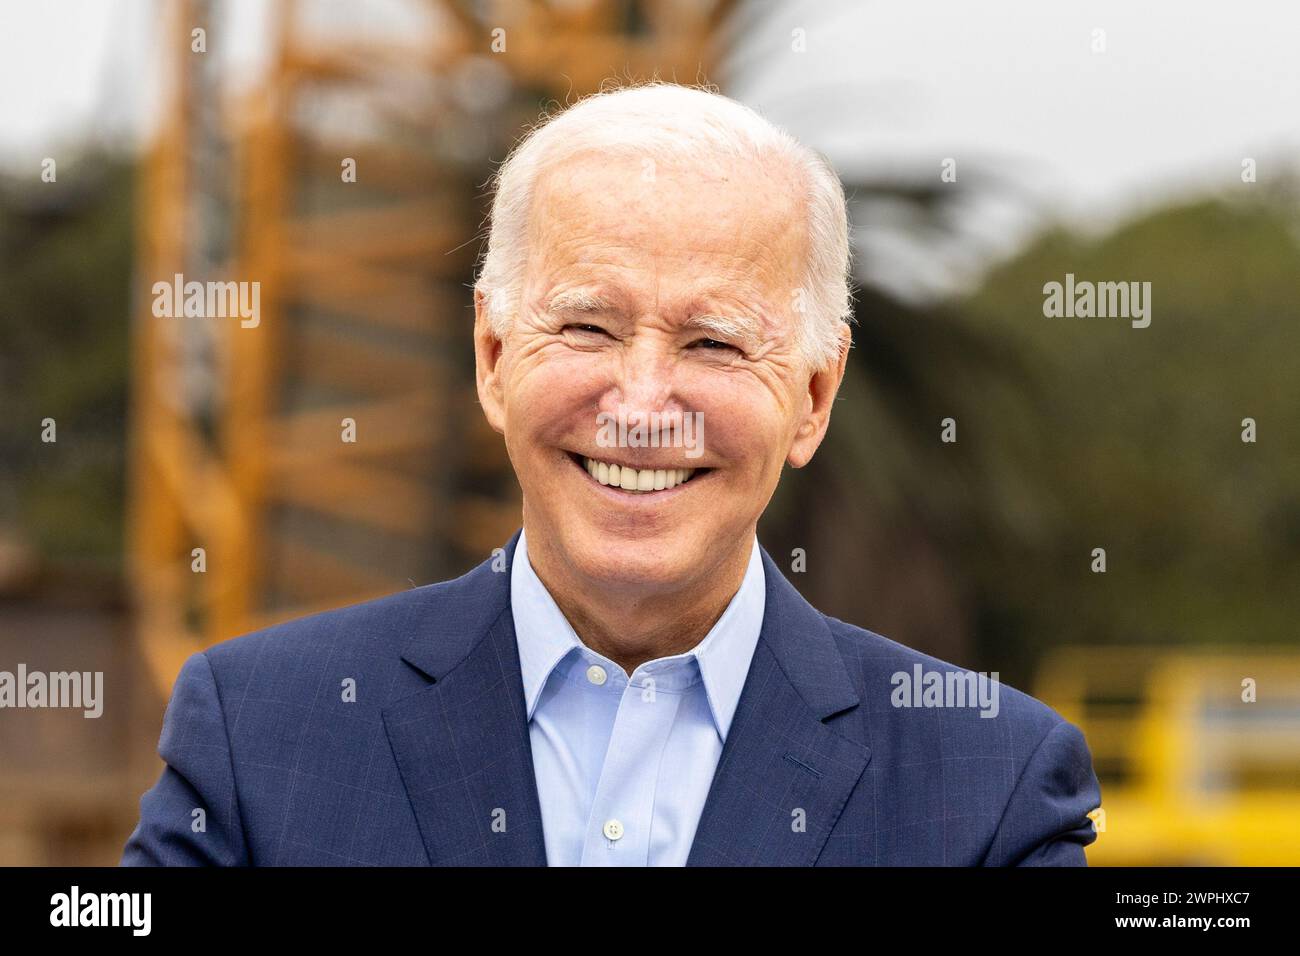 President Joe Biden speaks about infrastructure at a new train station, under construction at the Veterans Administration Hospital in Los Angeles. Stock Photo